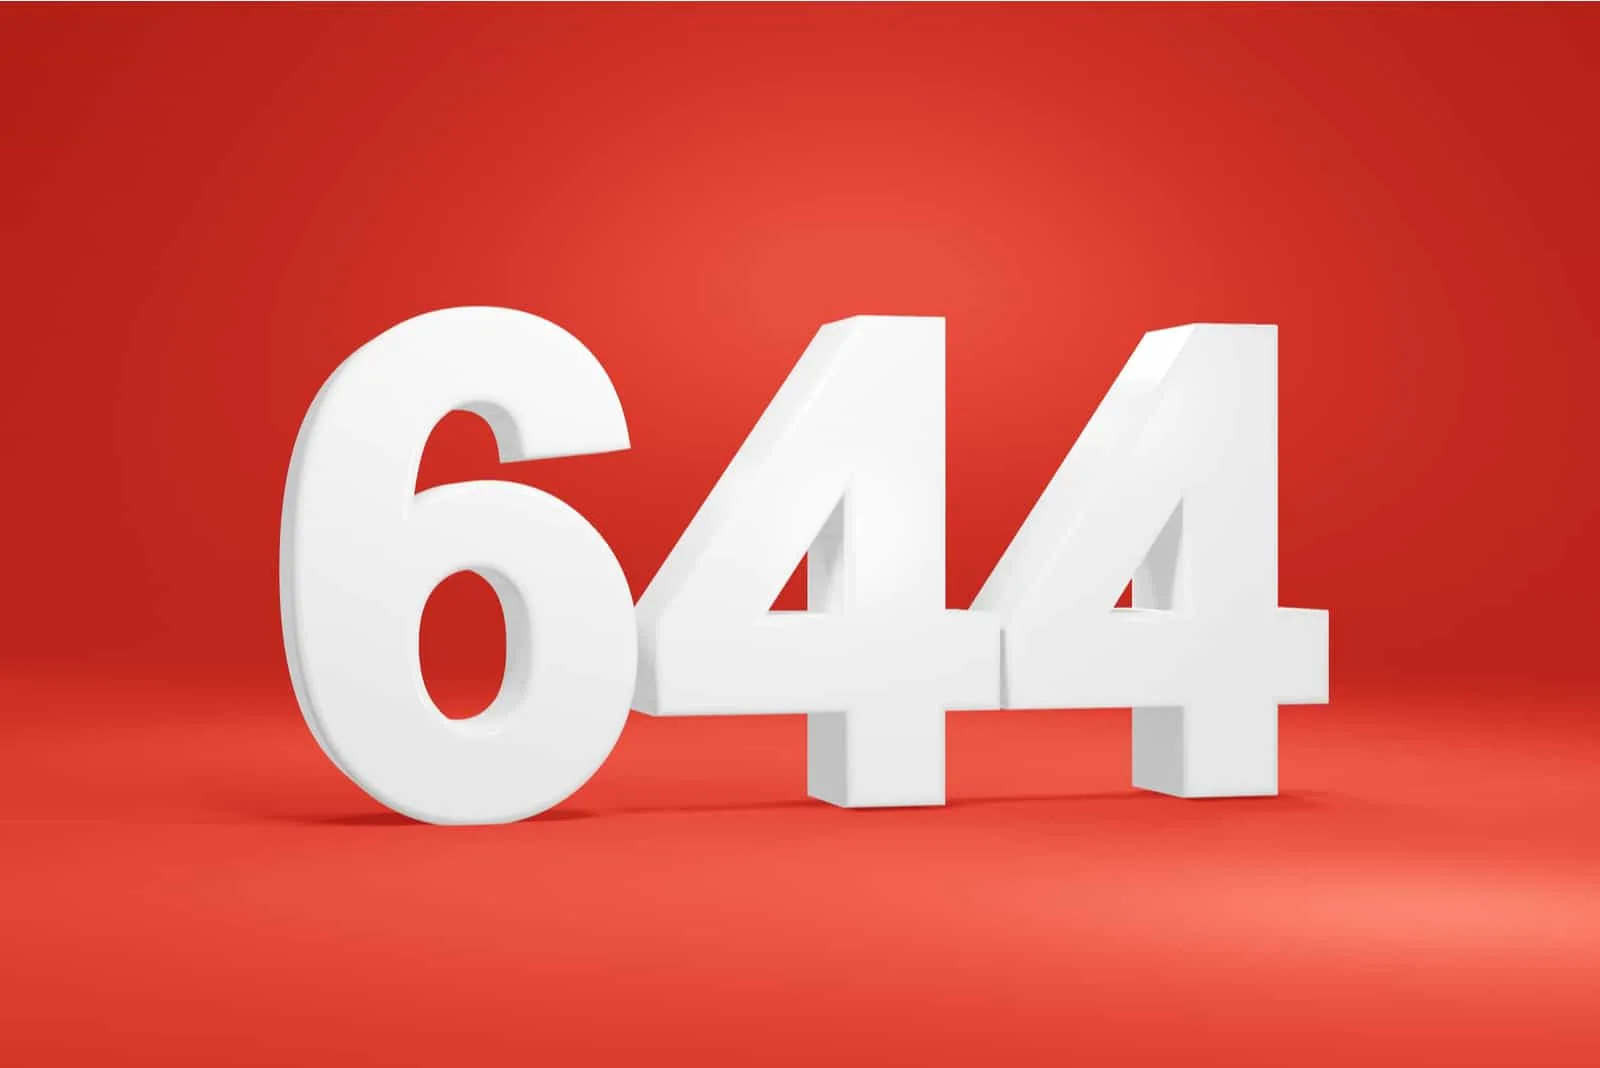 white number 644 on red background